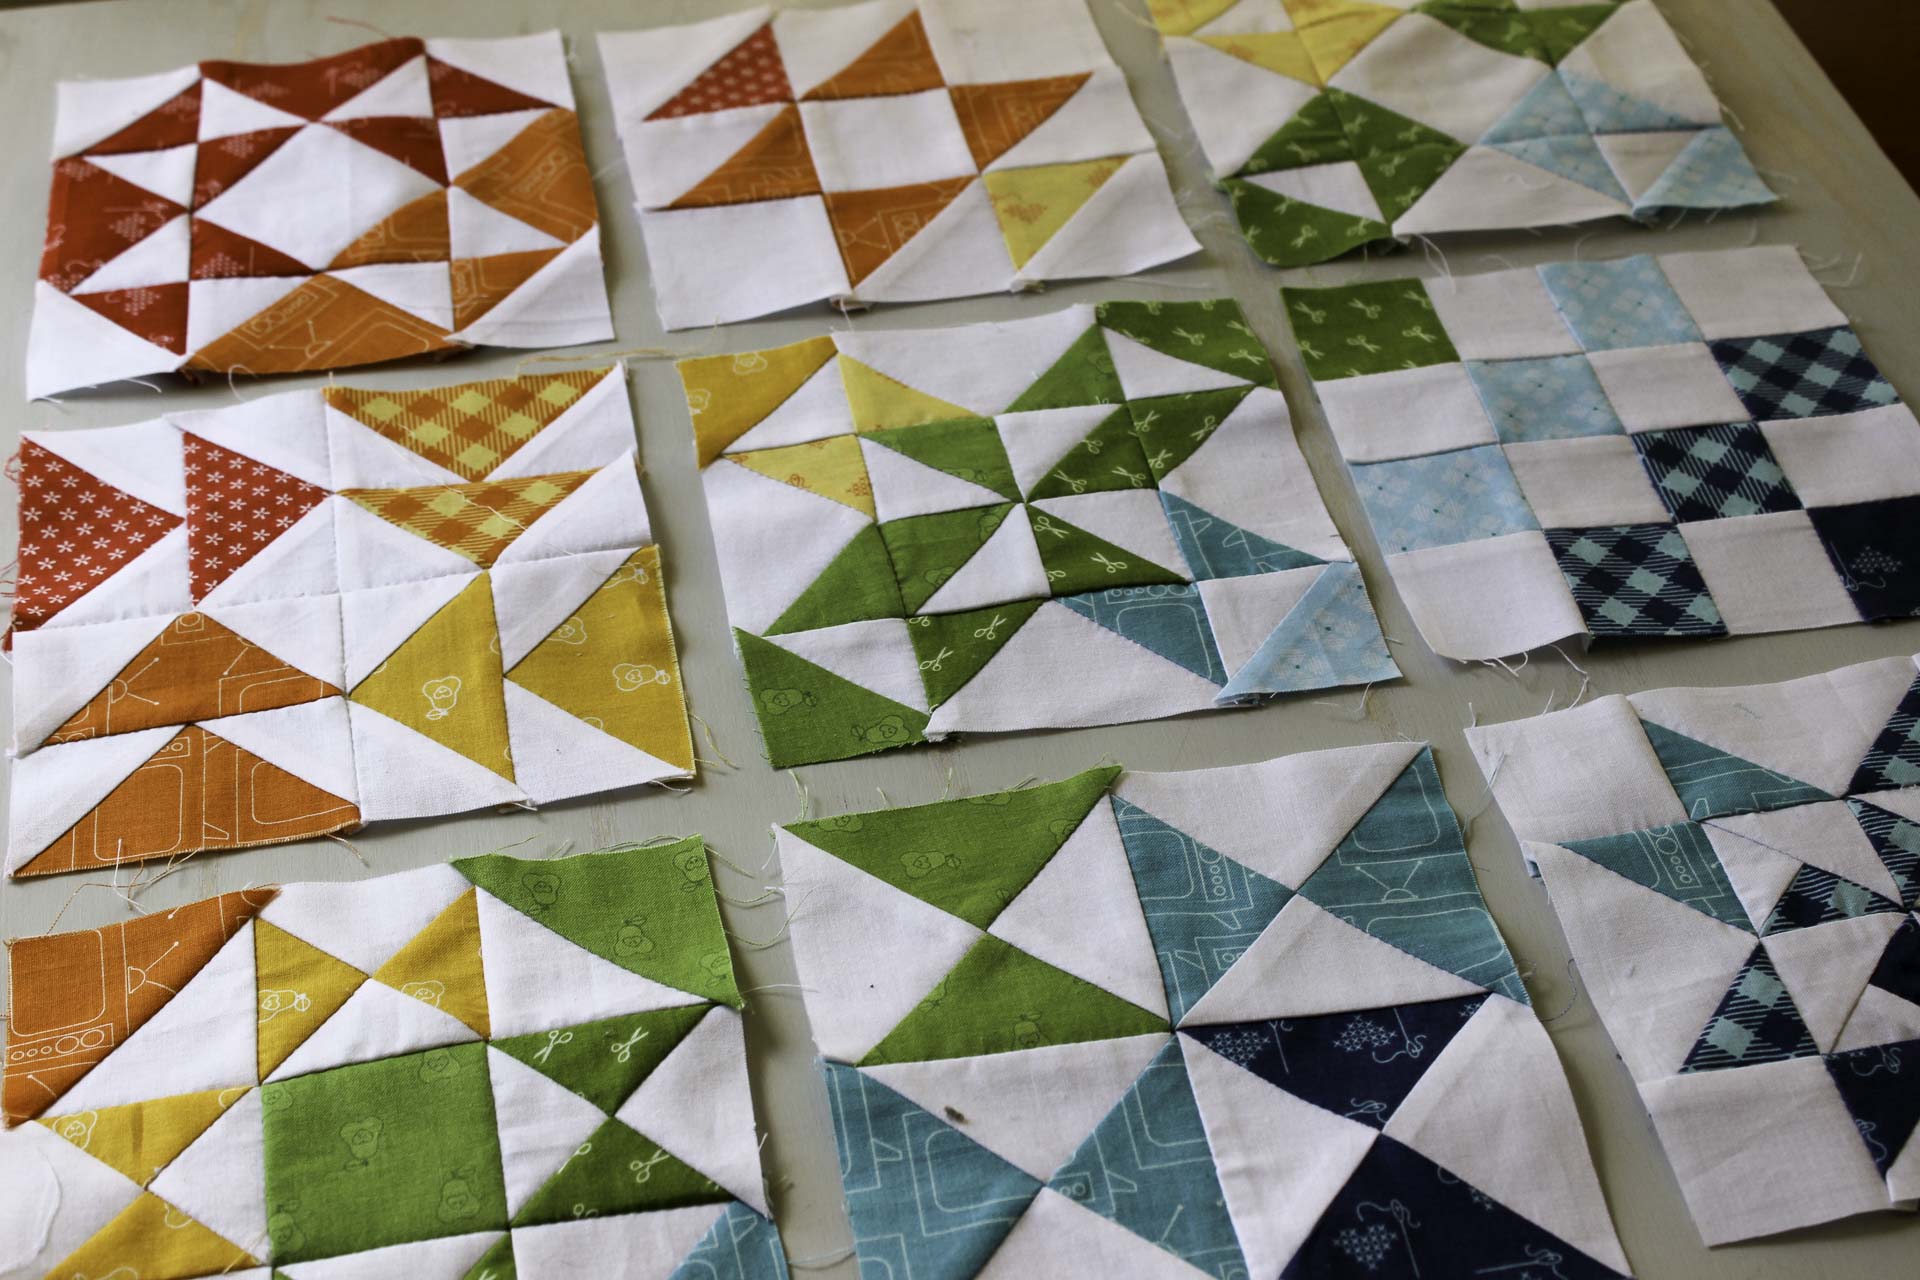 Hand Pieced Quilt, how to hand piece a quilt